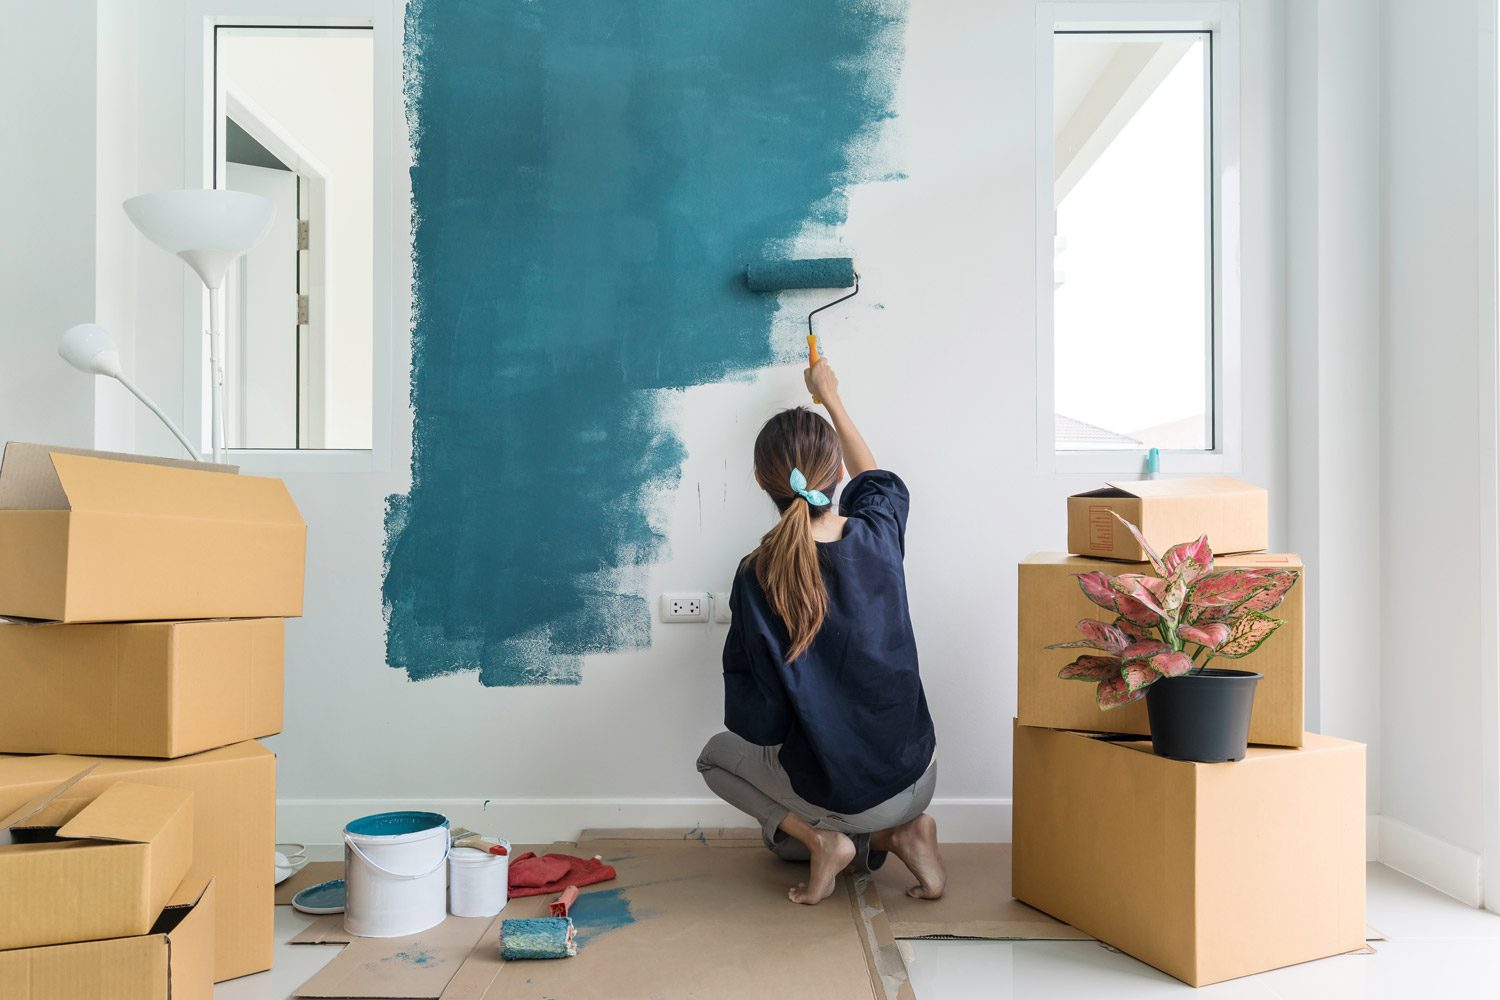 How to Paint a Room? Check Top Colors and Painting Ideas 2022